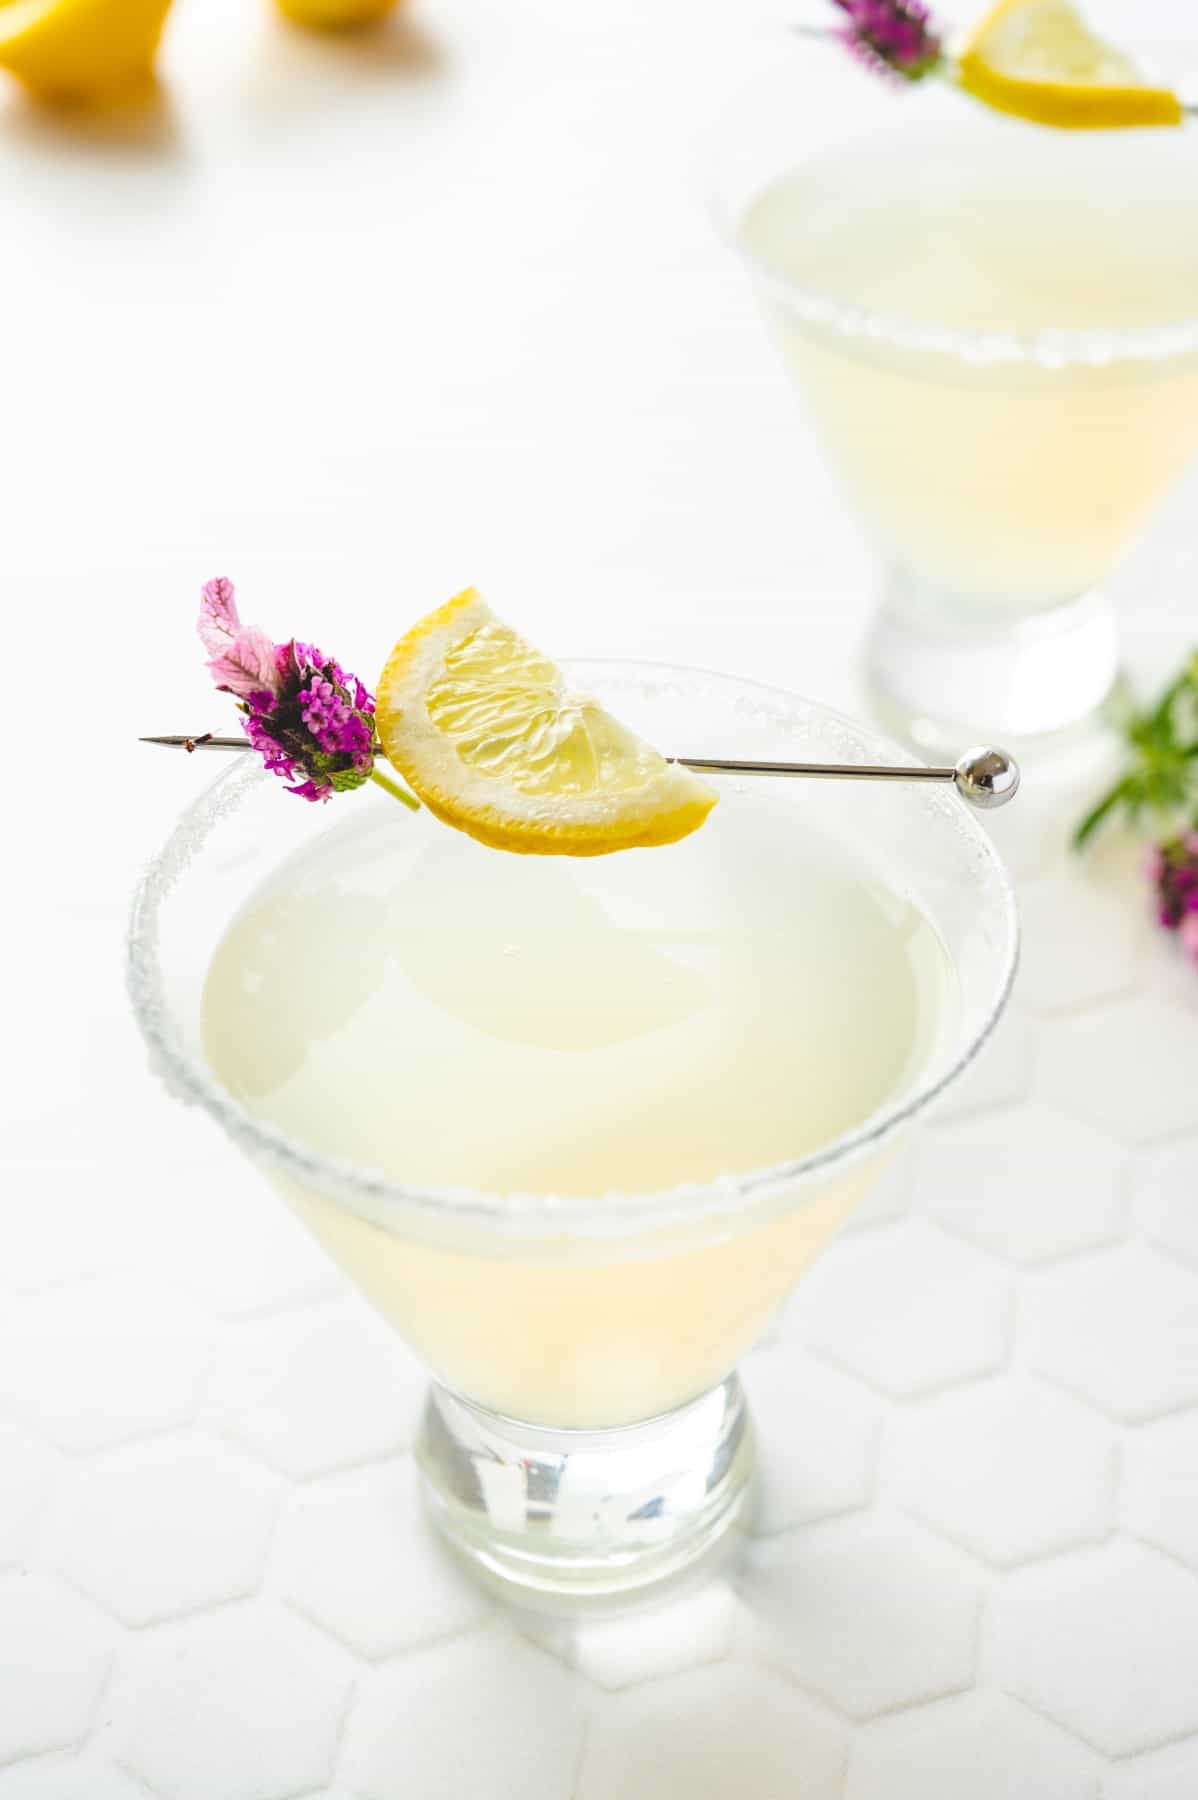 Looking at the garnish (lemon and a flower) in a martini glass. 